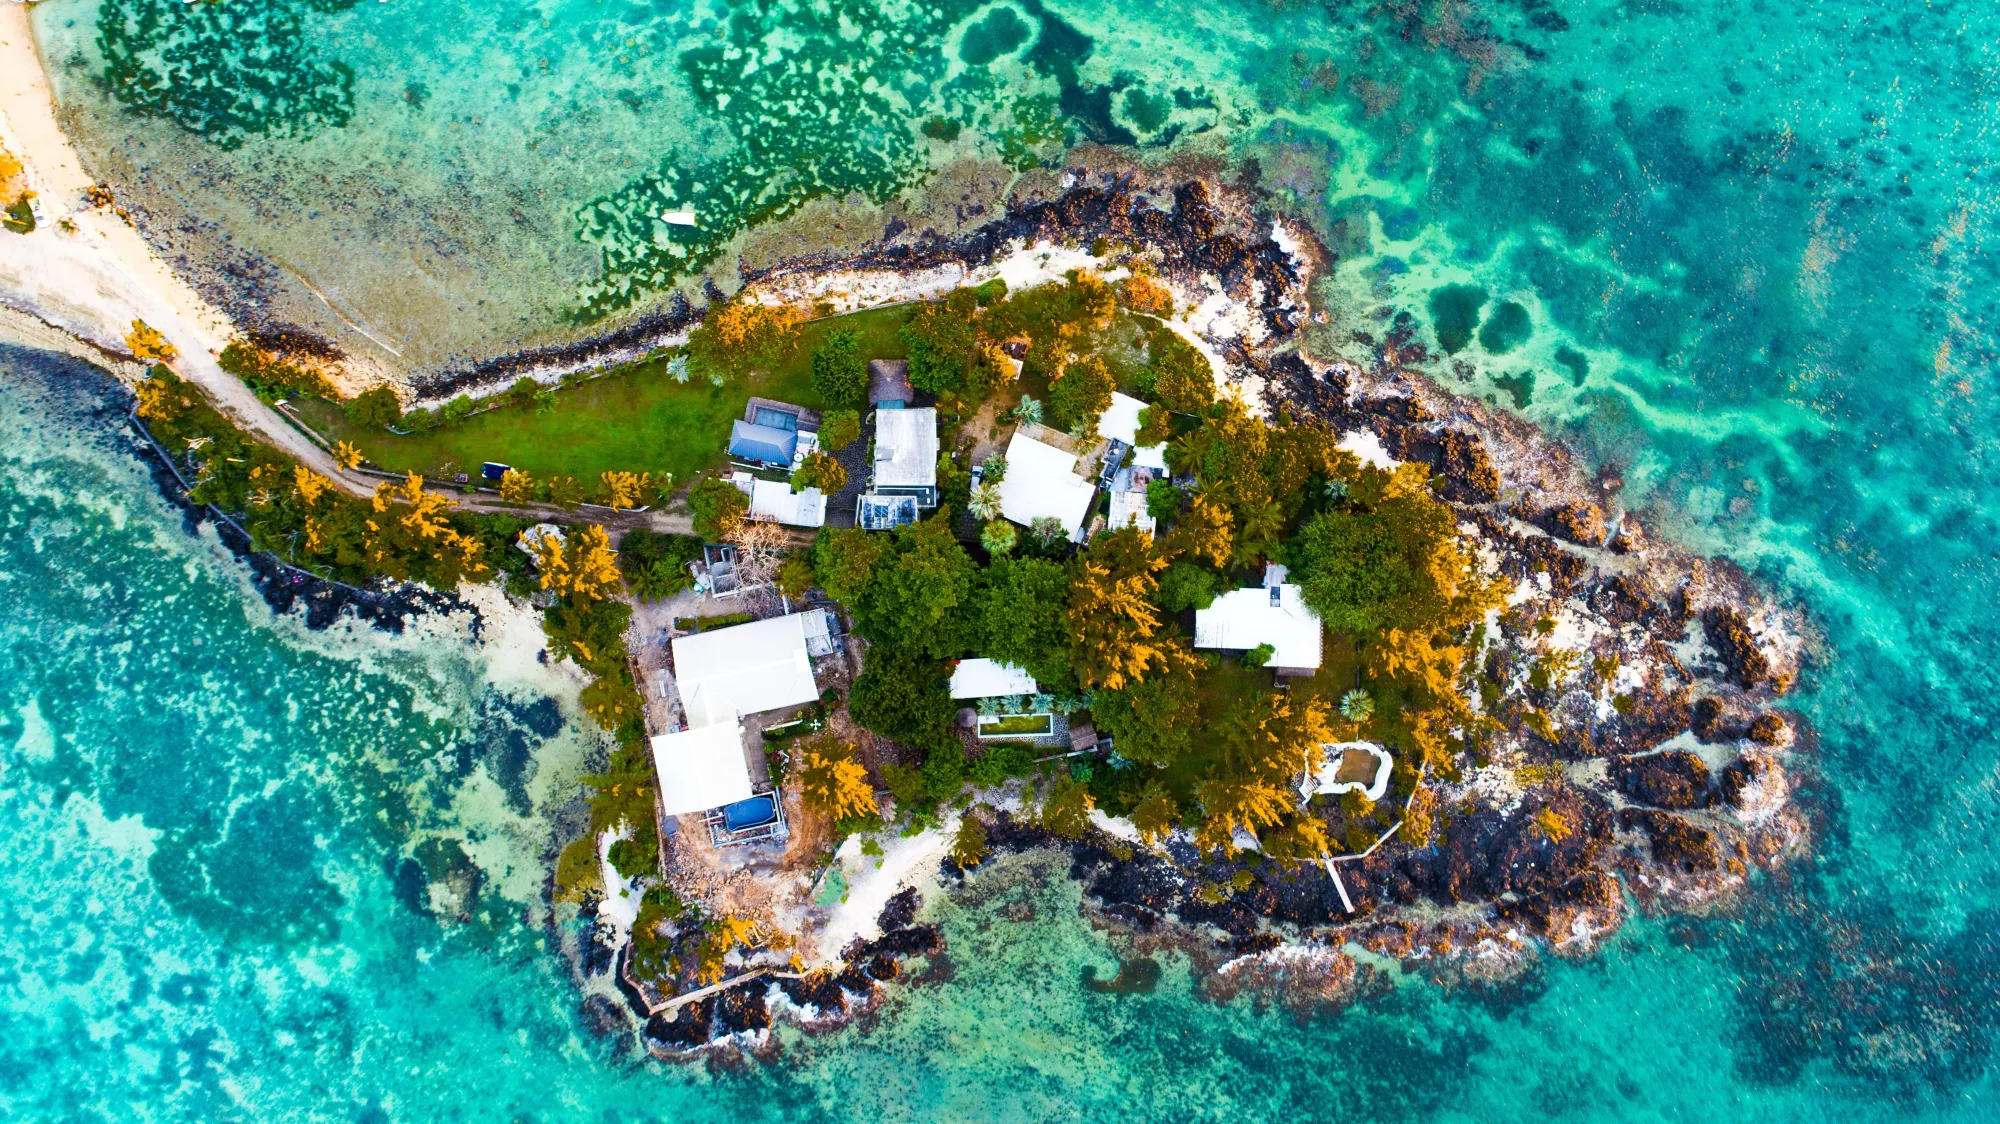 Image of a village in Mauritius from above